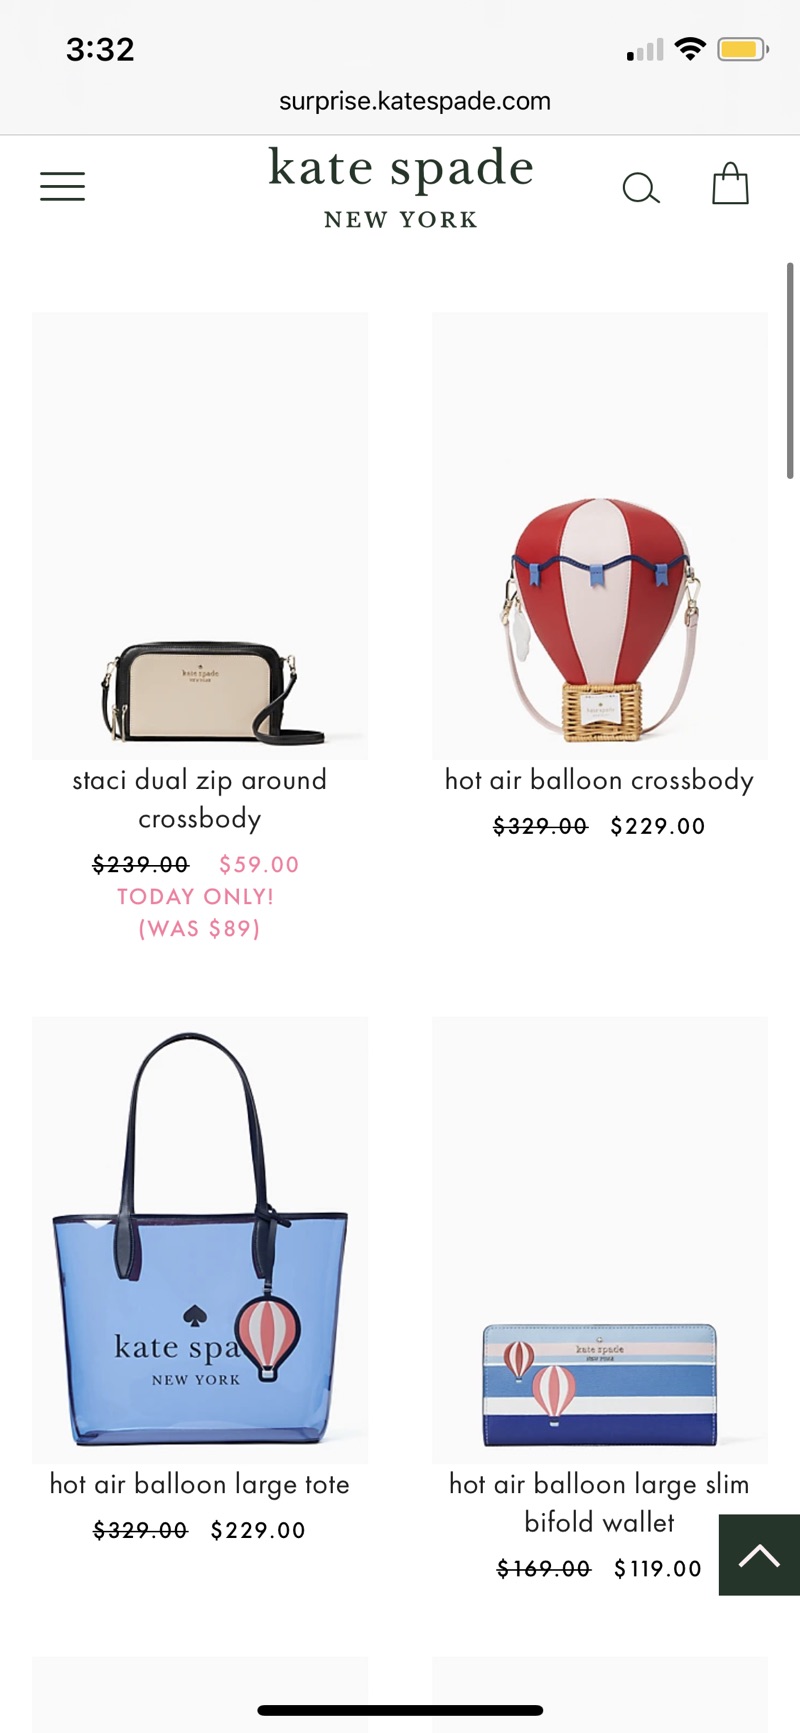 All Products - Handbags, Wallets, Jewelry & More | Kate Spade Surprise折扣区上新 低至25折